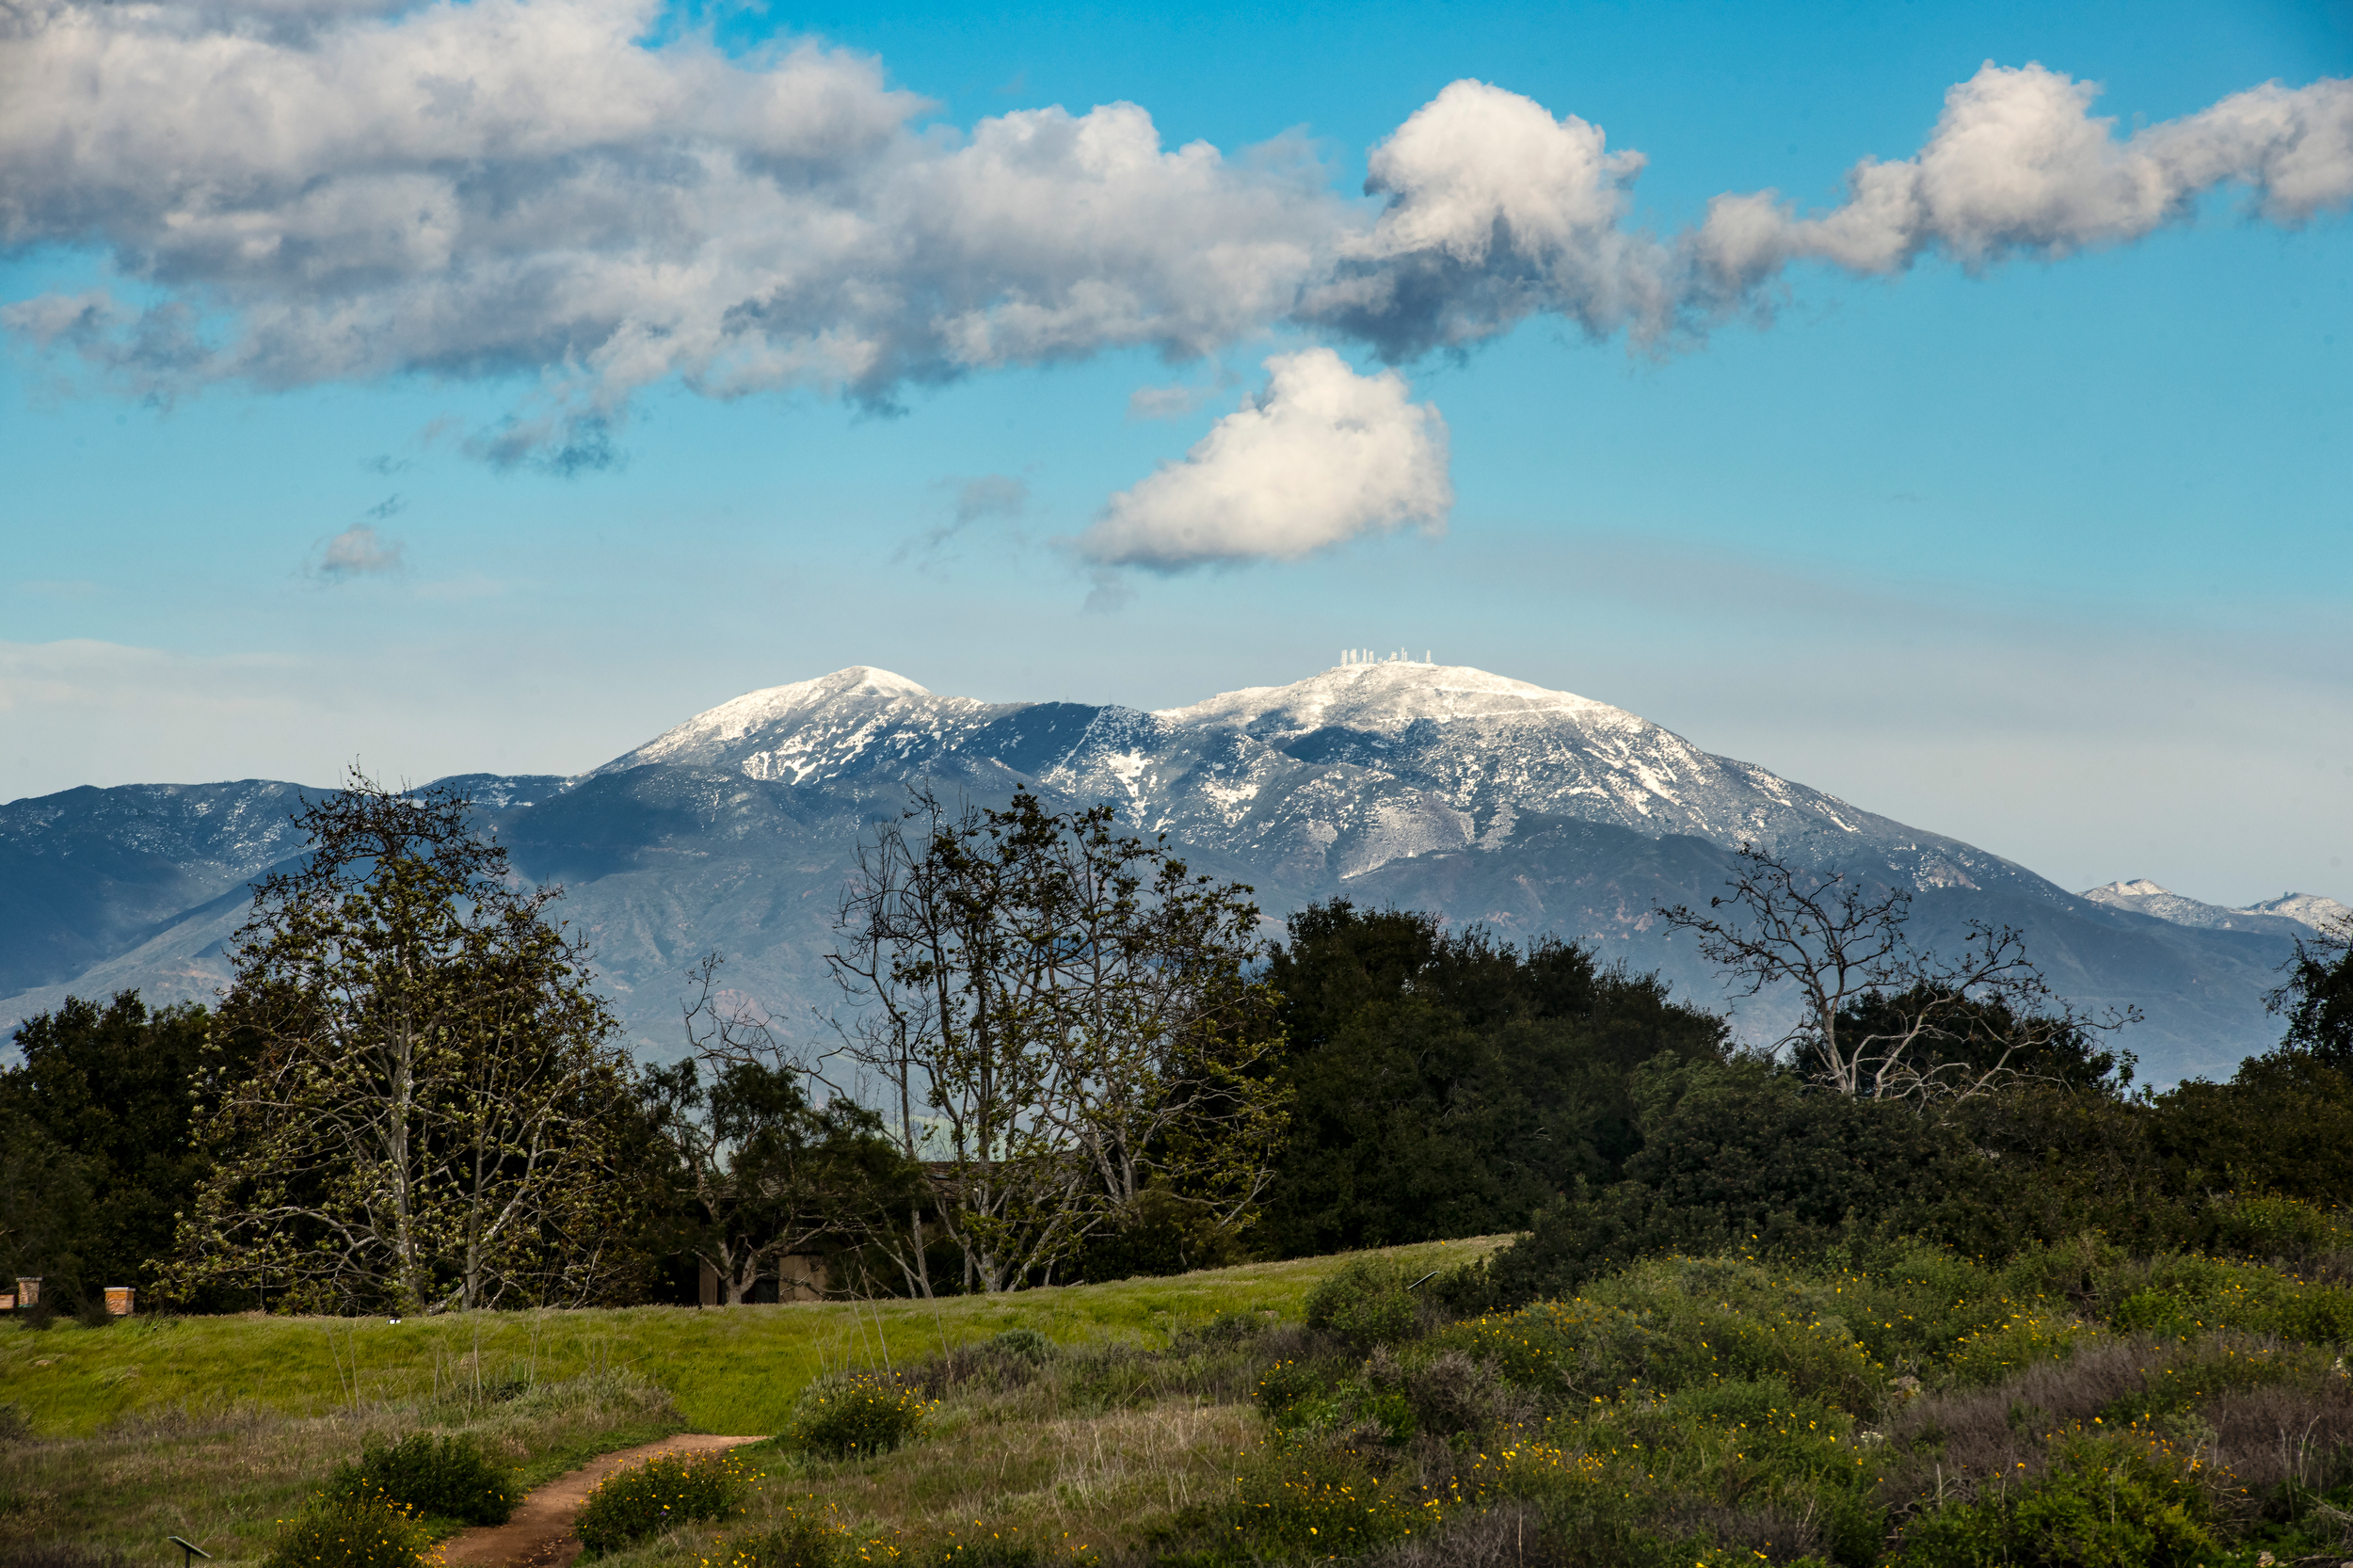 The UCI Ecological Preserve affords spectacular views, such as this one of a snow-capped Saddleback Mountain.